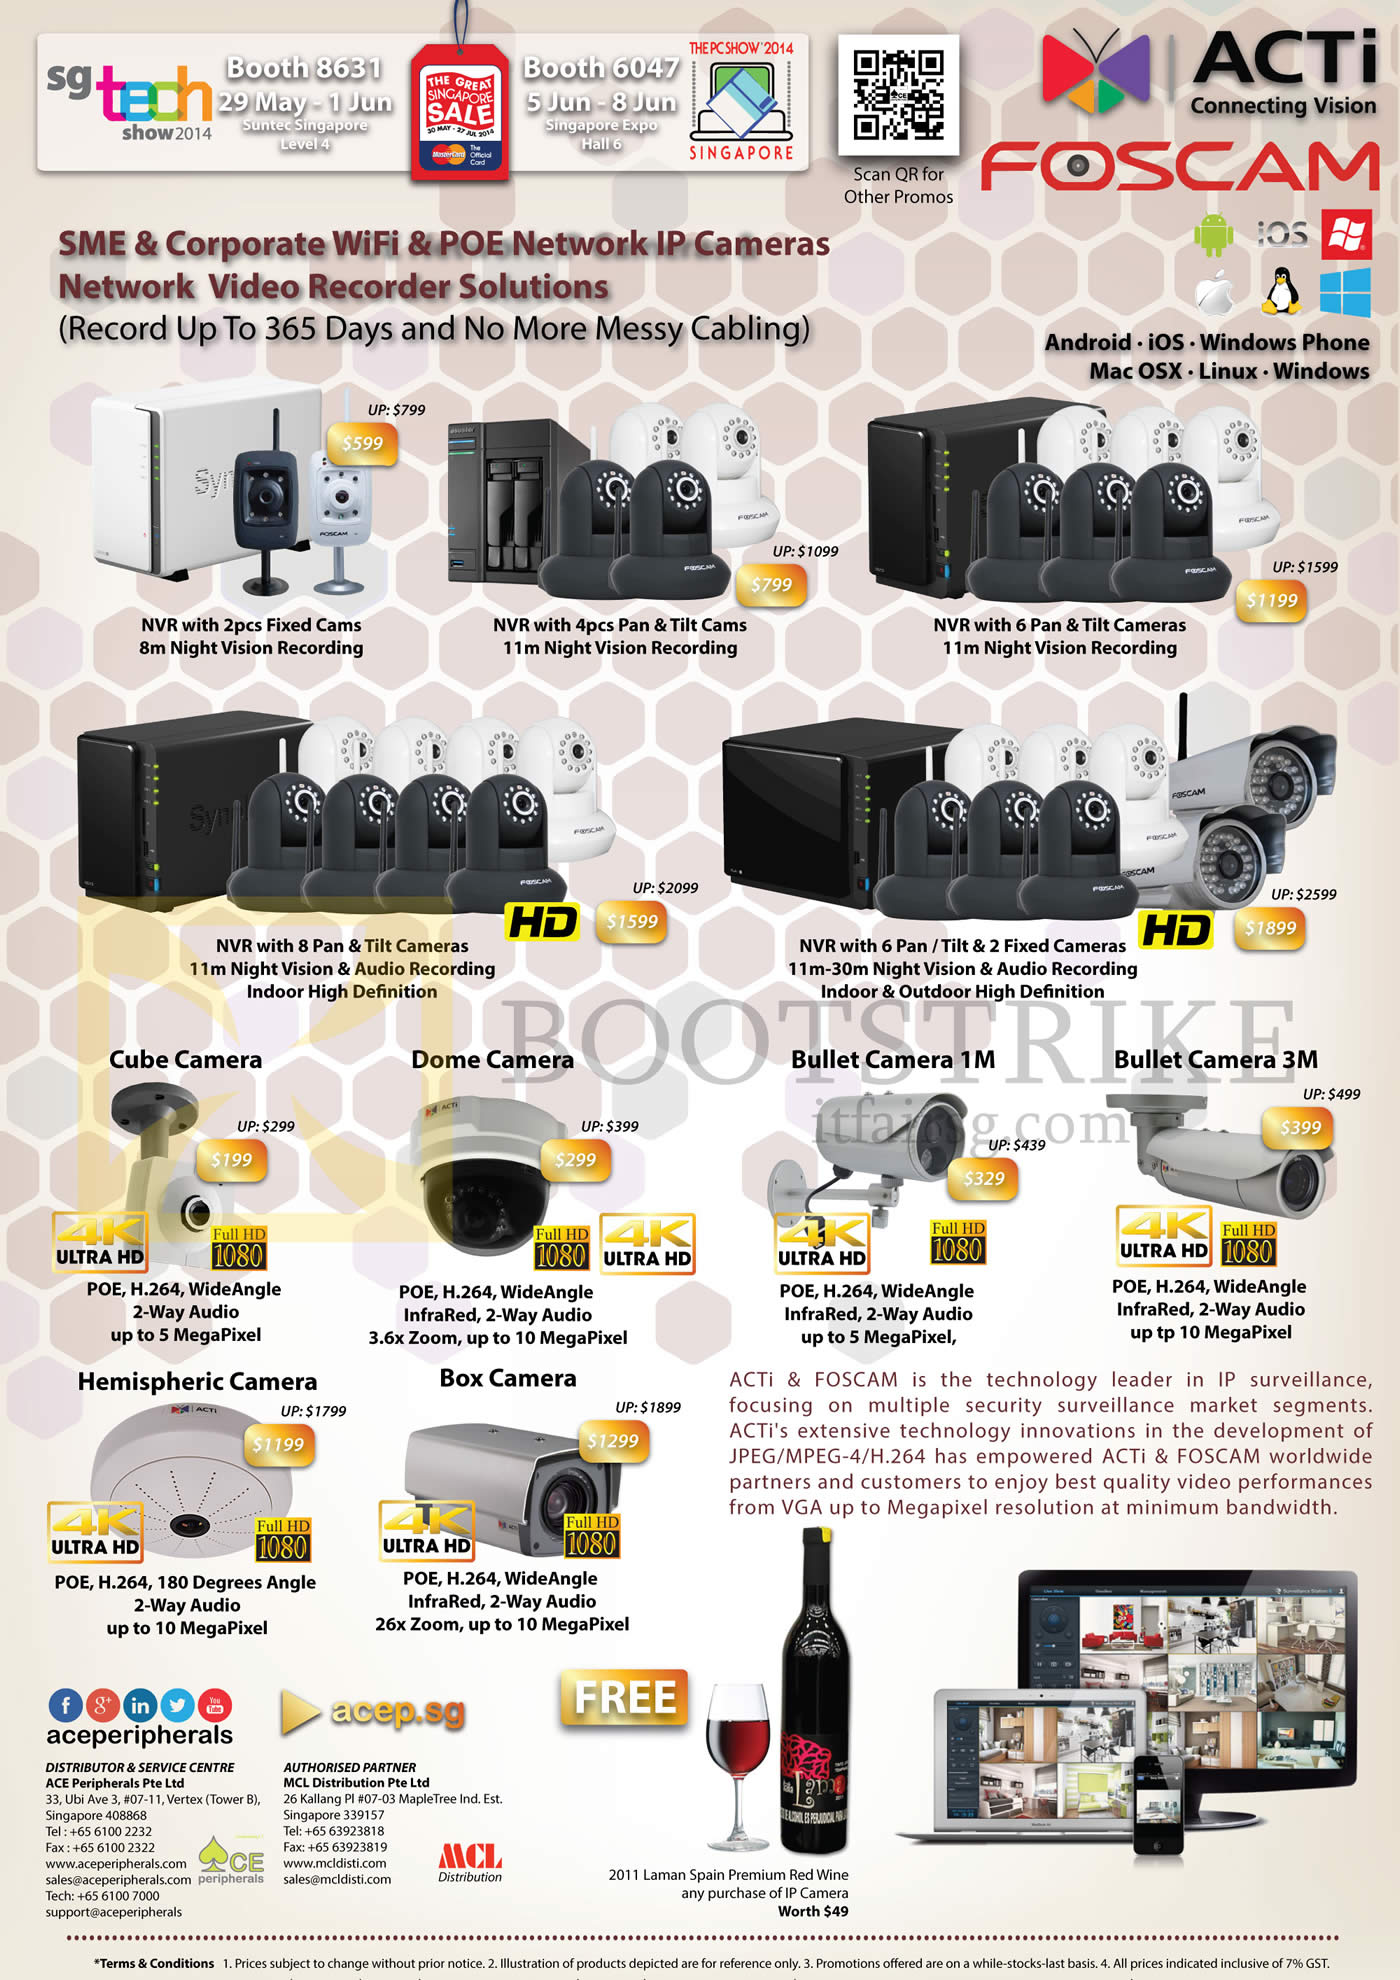 PC SHOW 2014 price list image brochure of ACE Peripherals ACTI Foscam Wifi, POE Network IP Cameras, Night Vision Recording, Cube, Dome, Bullet, Hemispherix, Box